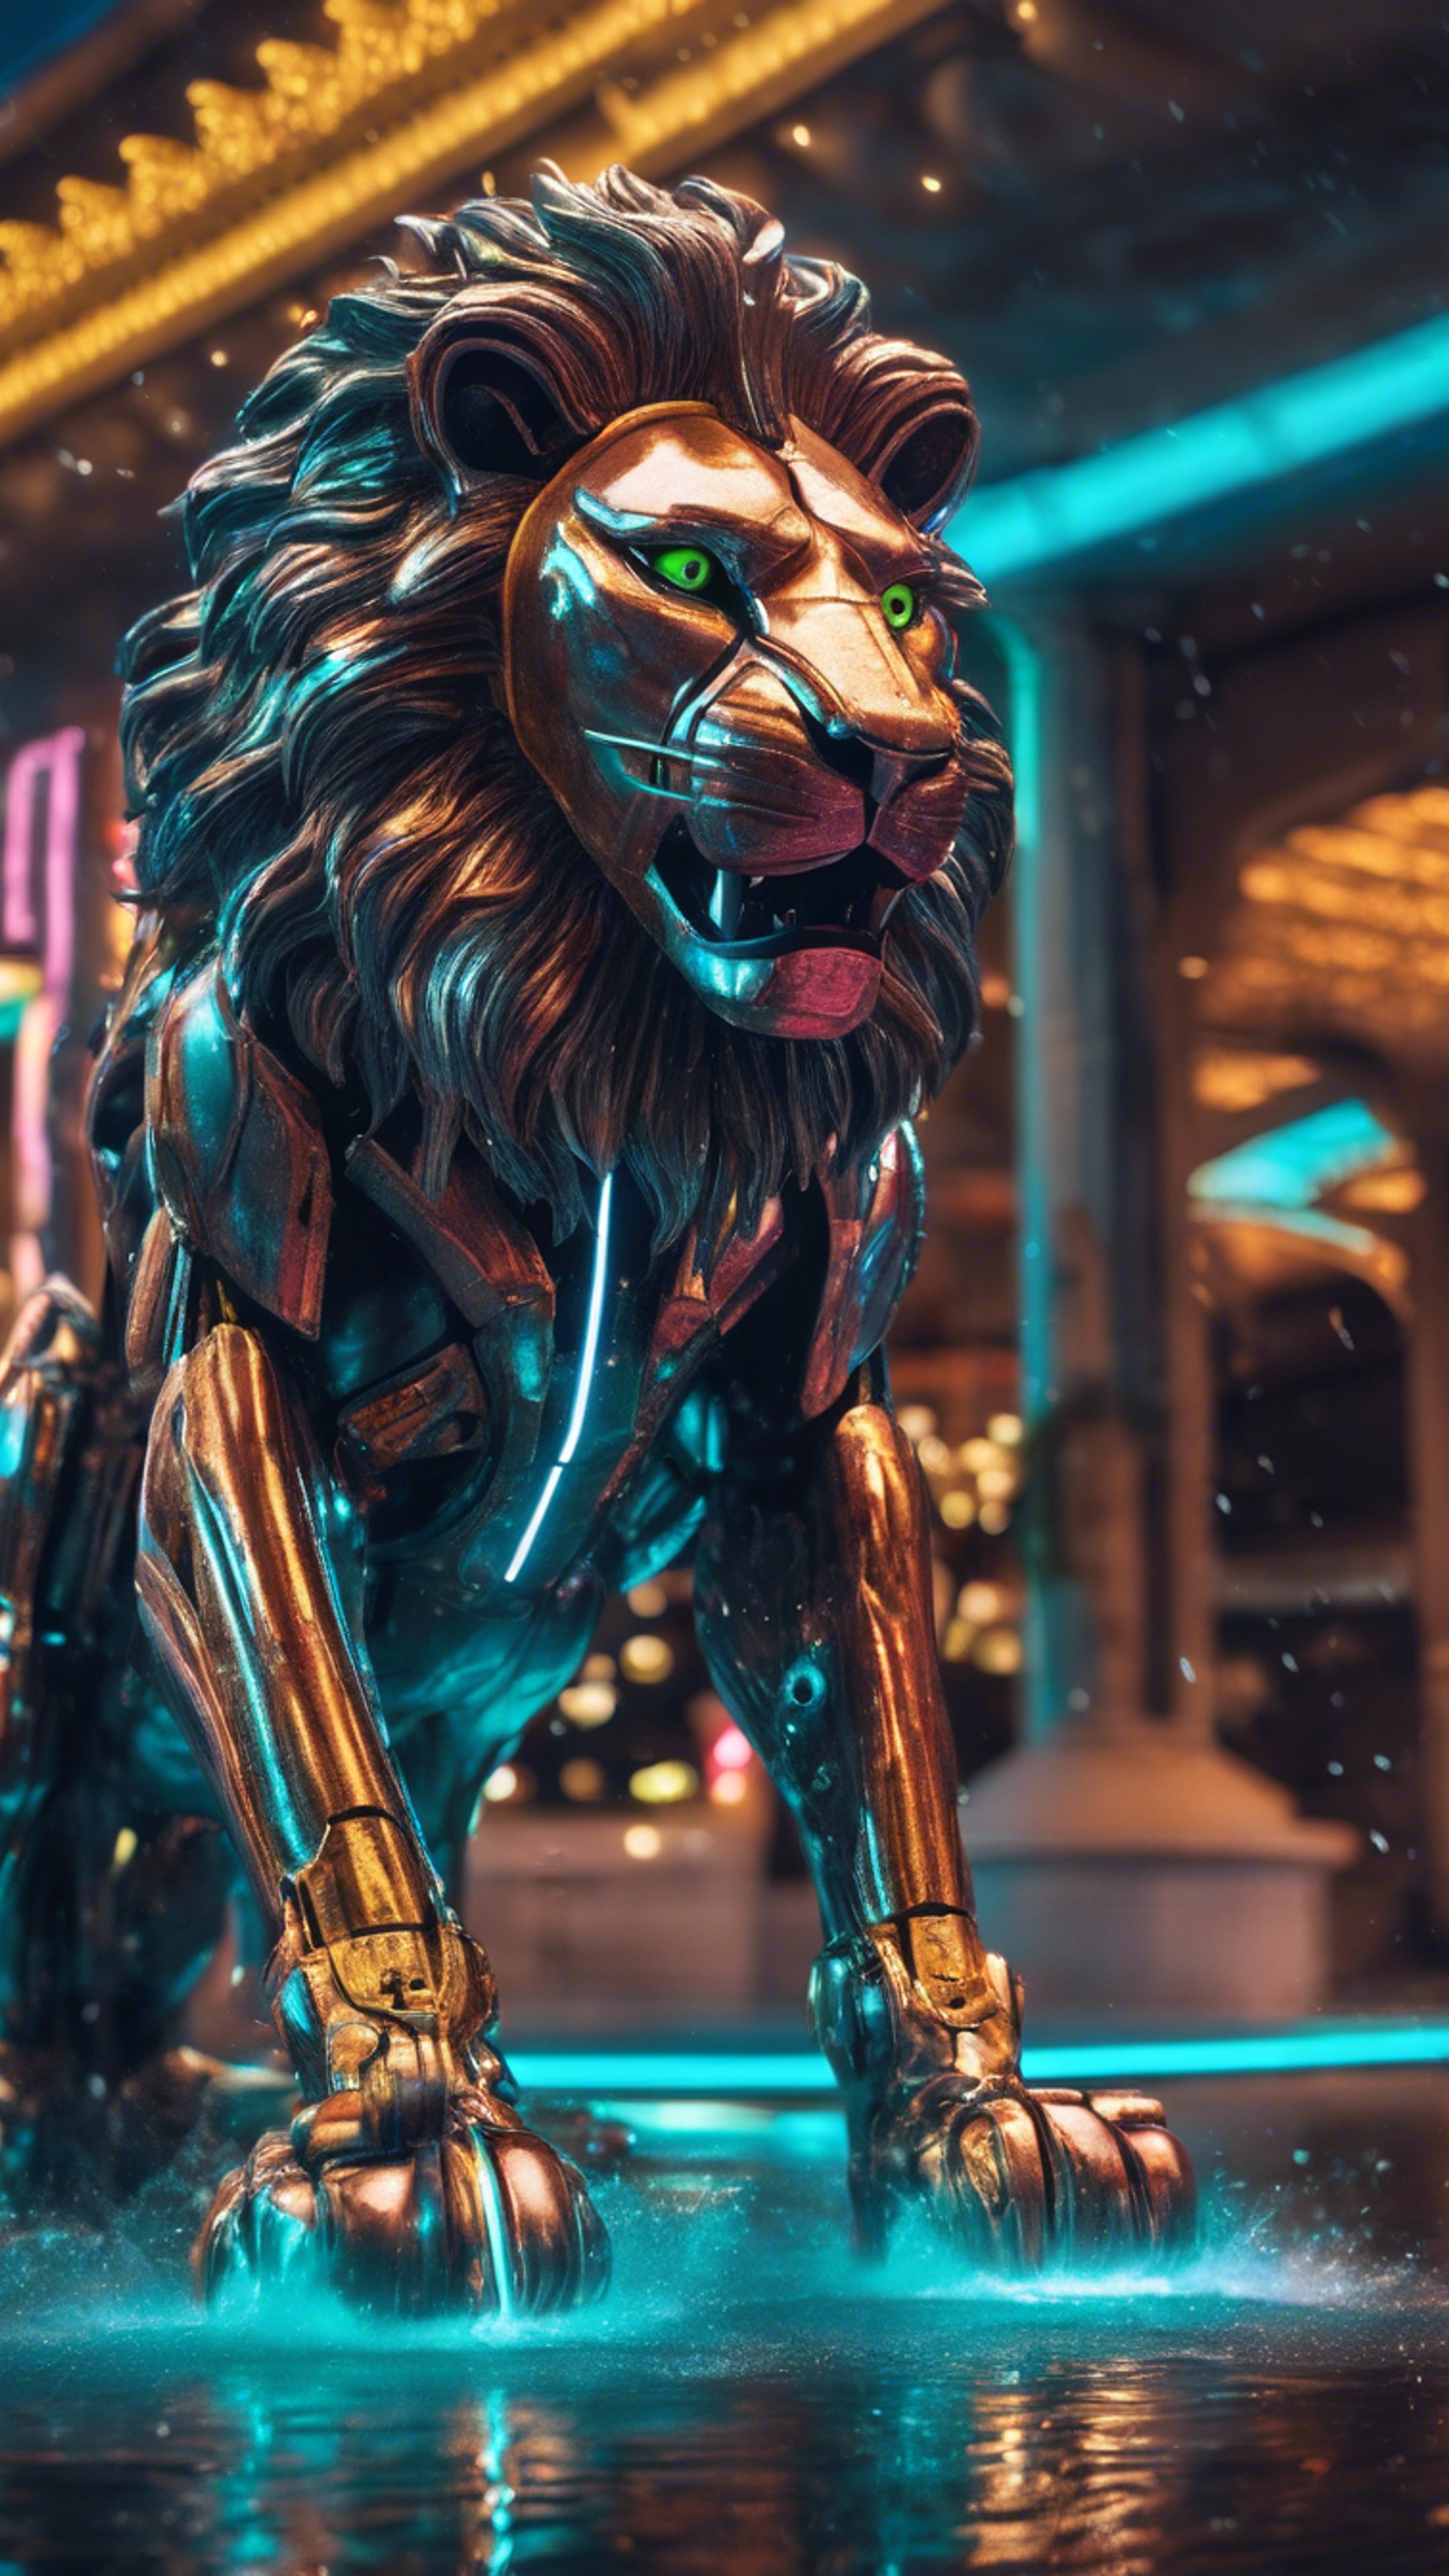 A Y2K styled robotic lion roaring under an electrified neon spurting futuristic fountain. Hintergrund[9e4620f6404c4f778621]